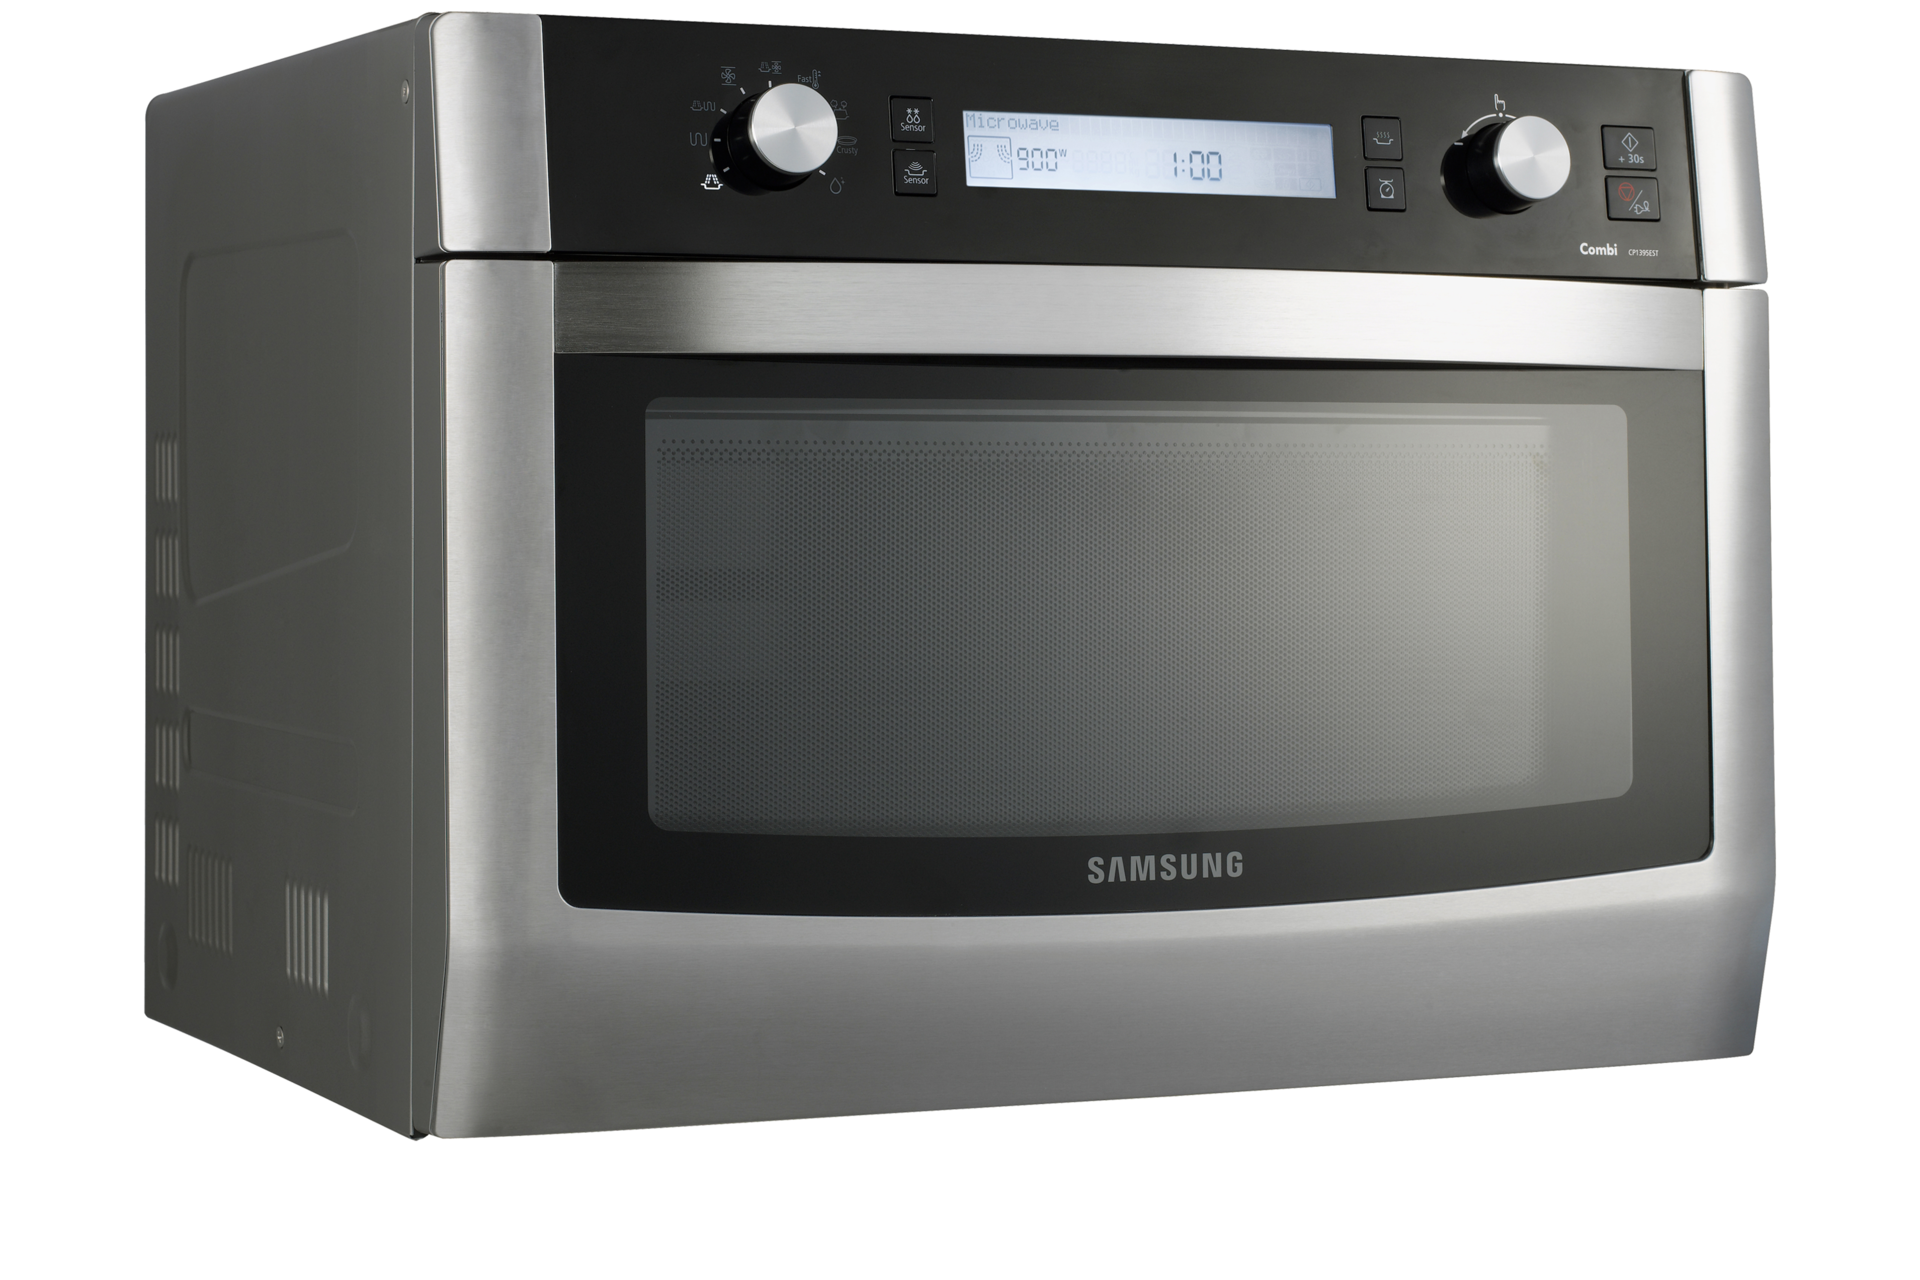 CP1395EST 36 Liter Convection Microwave Oven | SAMSUNG Africa